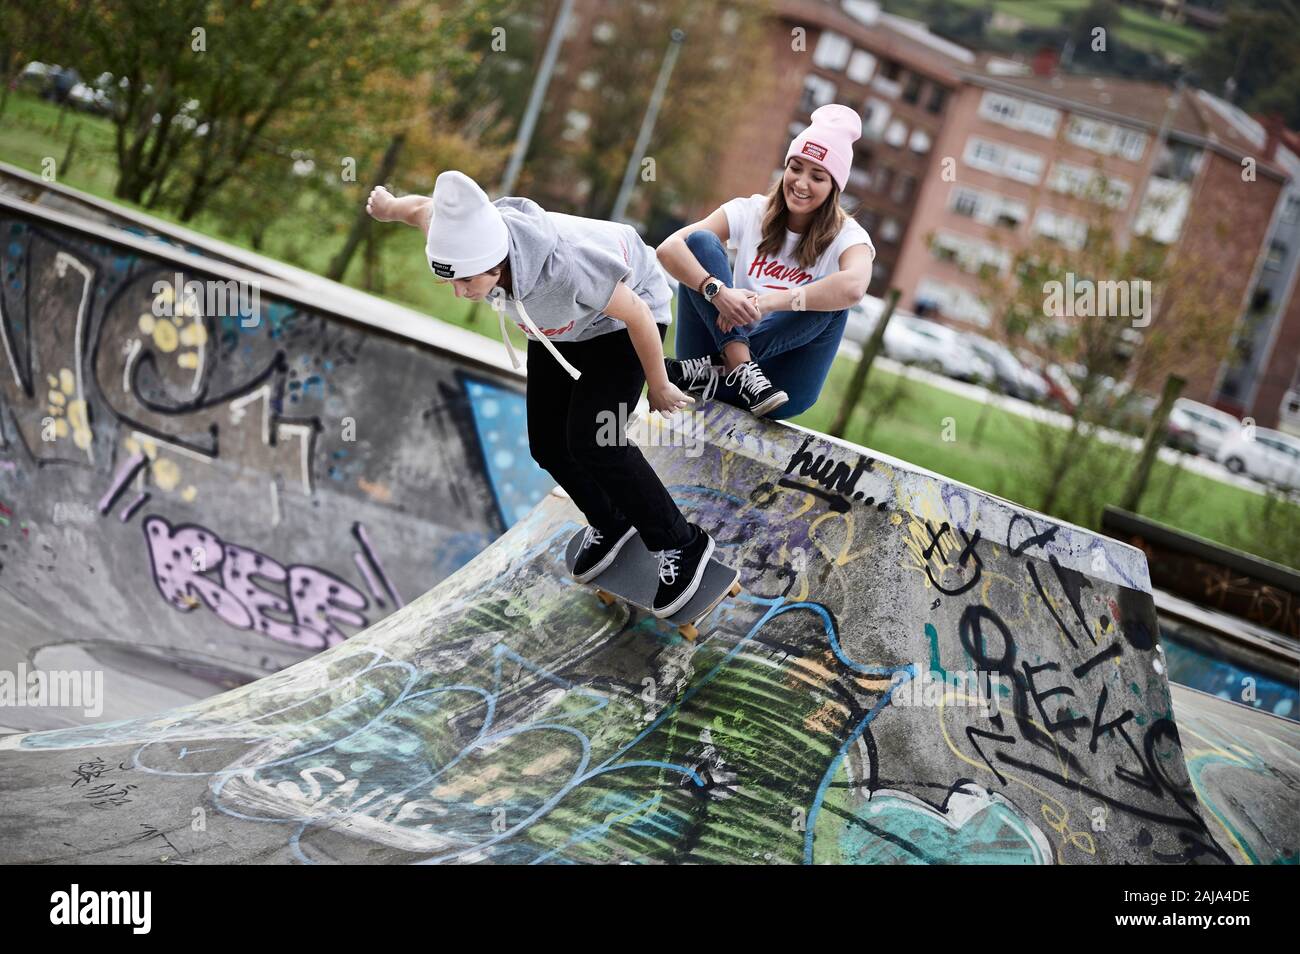 Young woman riding skateboard Banque D'Images